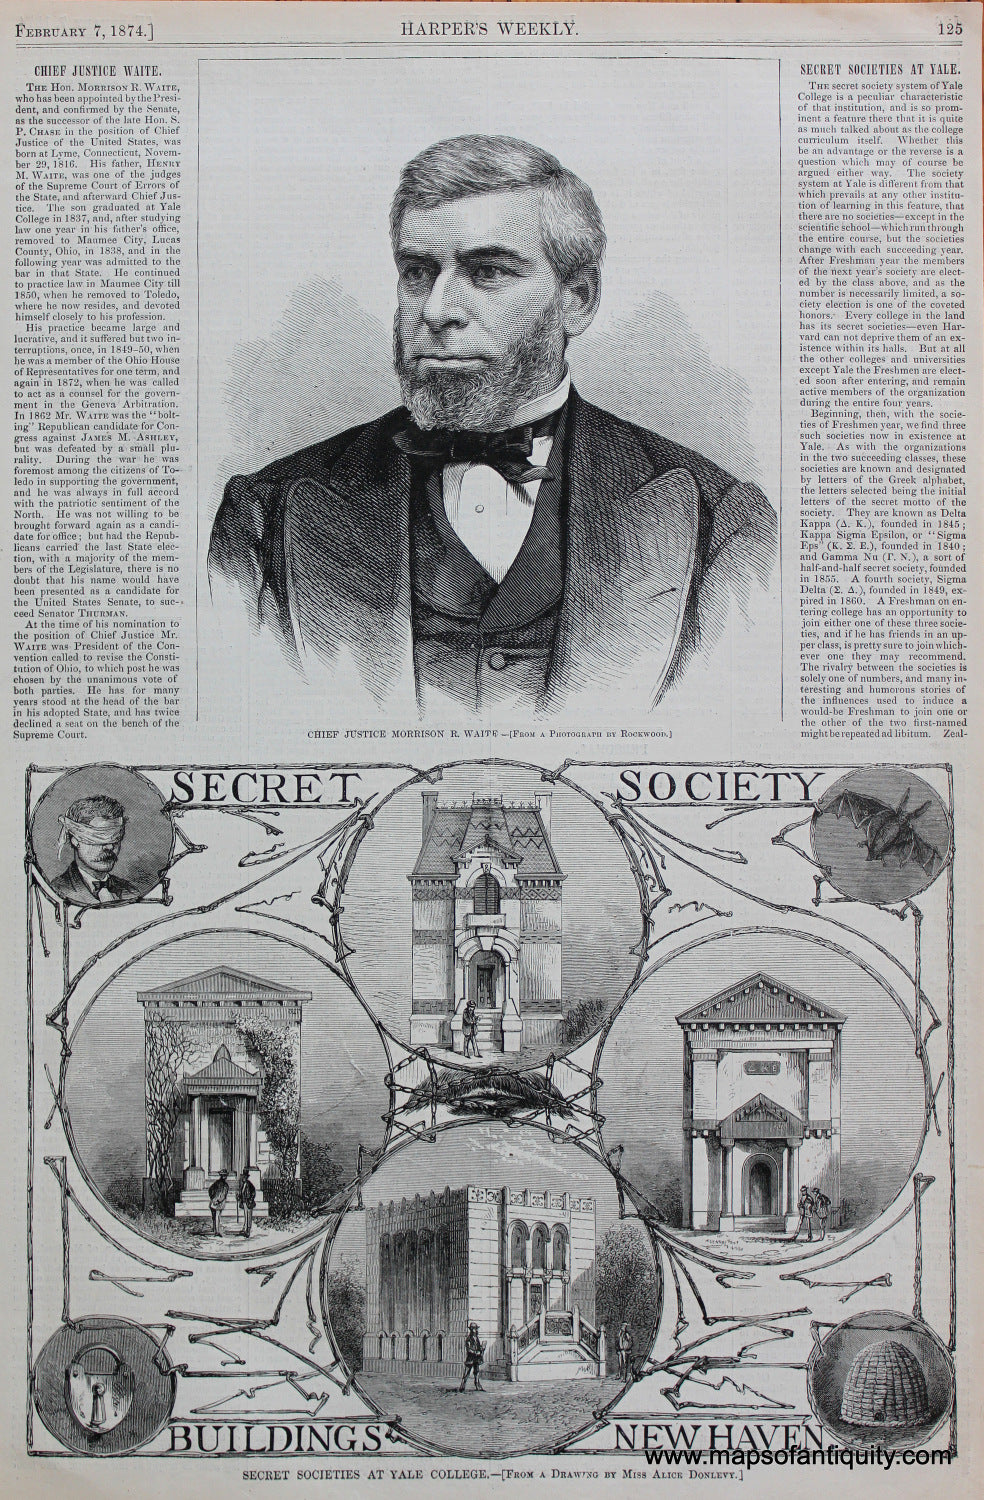 Antique-Black-and-White-Print-Secret-Societies-at-Yale-College-****-College-Prints-Yale-1874-Harper's-Weekly-Maps-Of-Antiquity